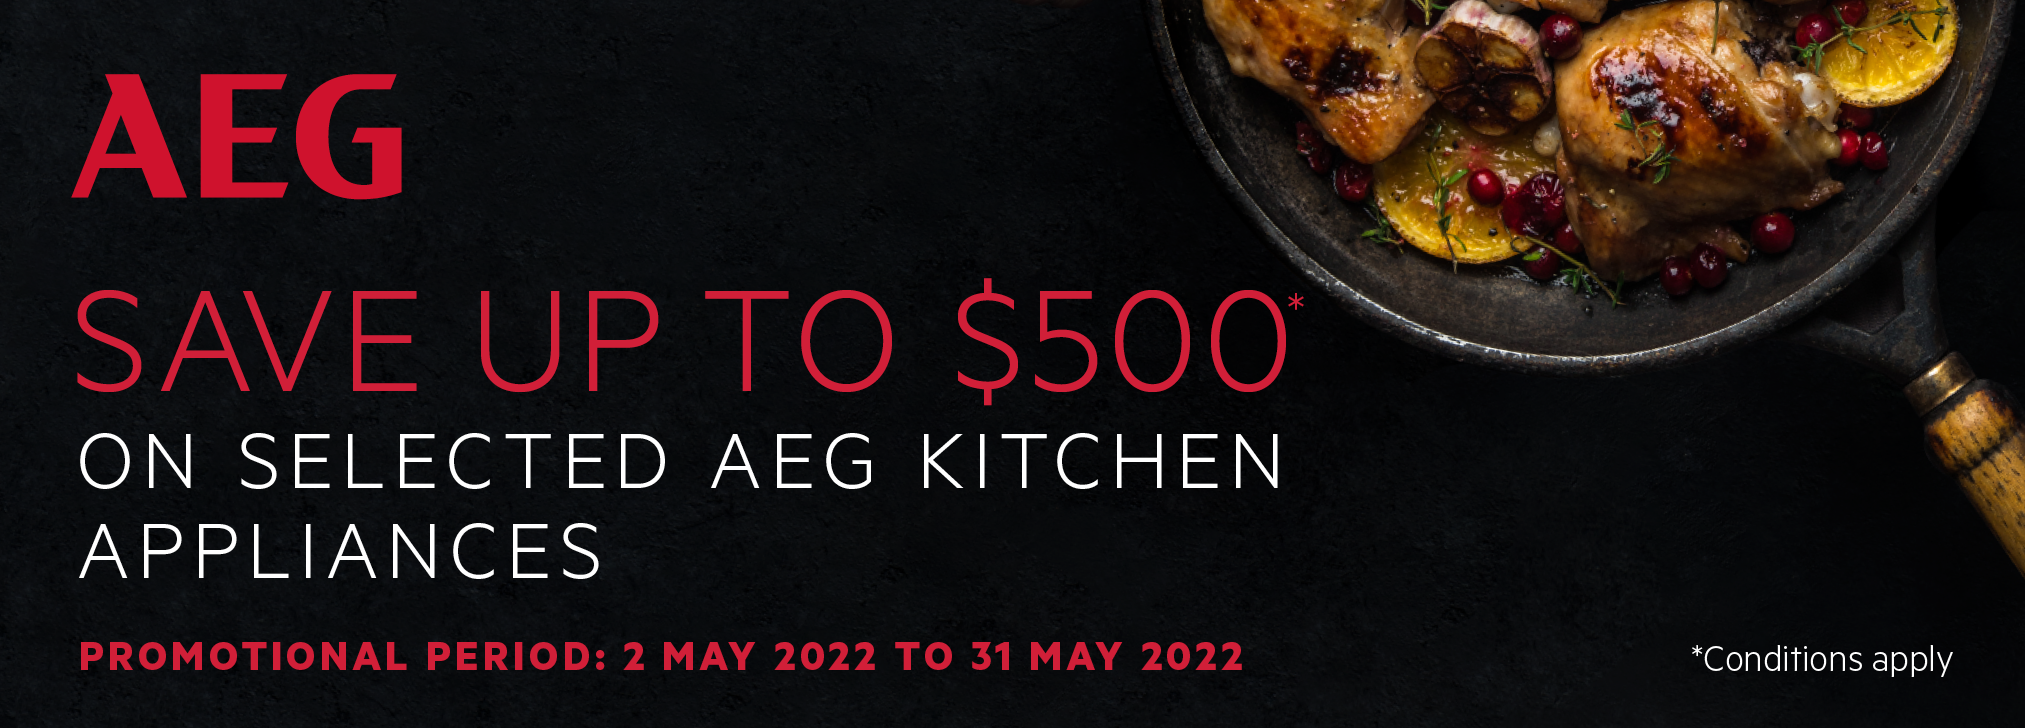 Save up to $500 on selected AEG Cooking Appliances